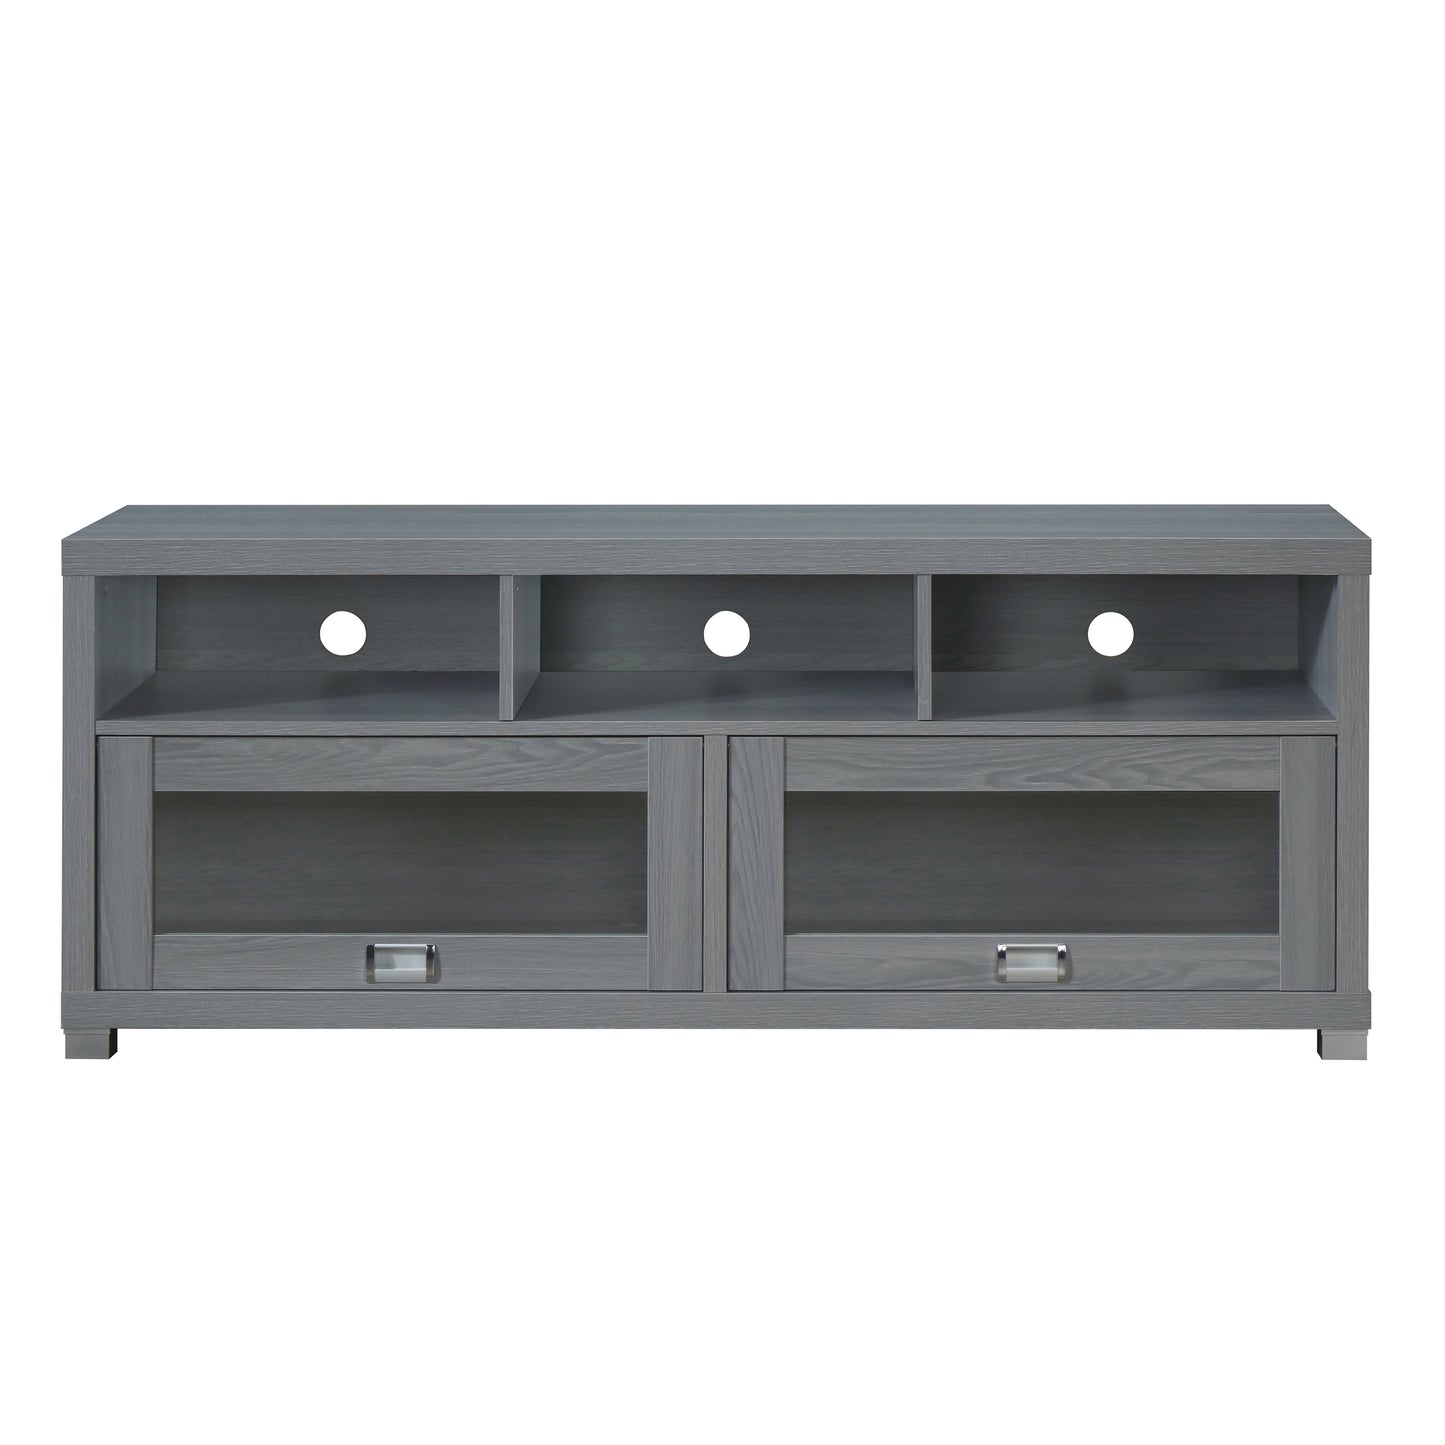 Techni Mobili Durbin TV Stand for TVs up to 75in, Grey